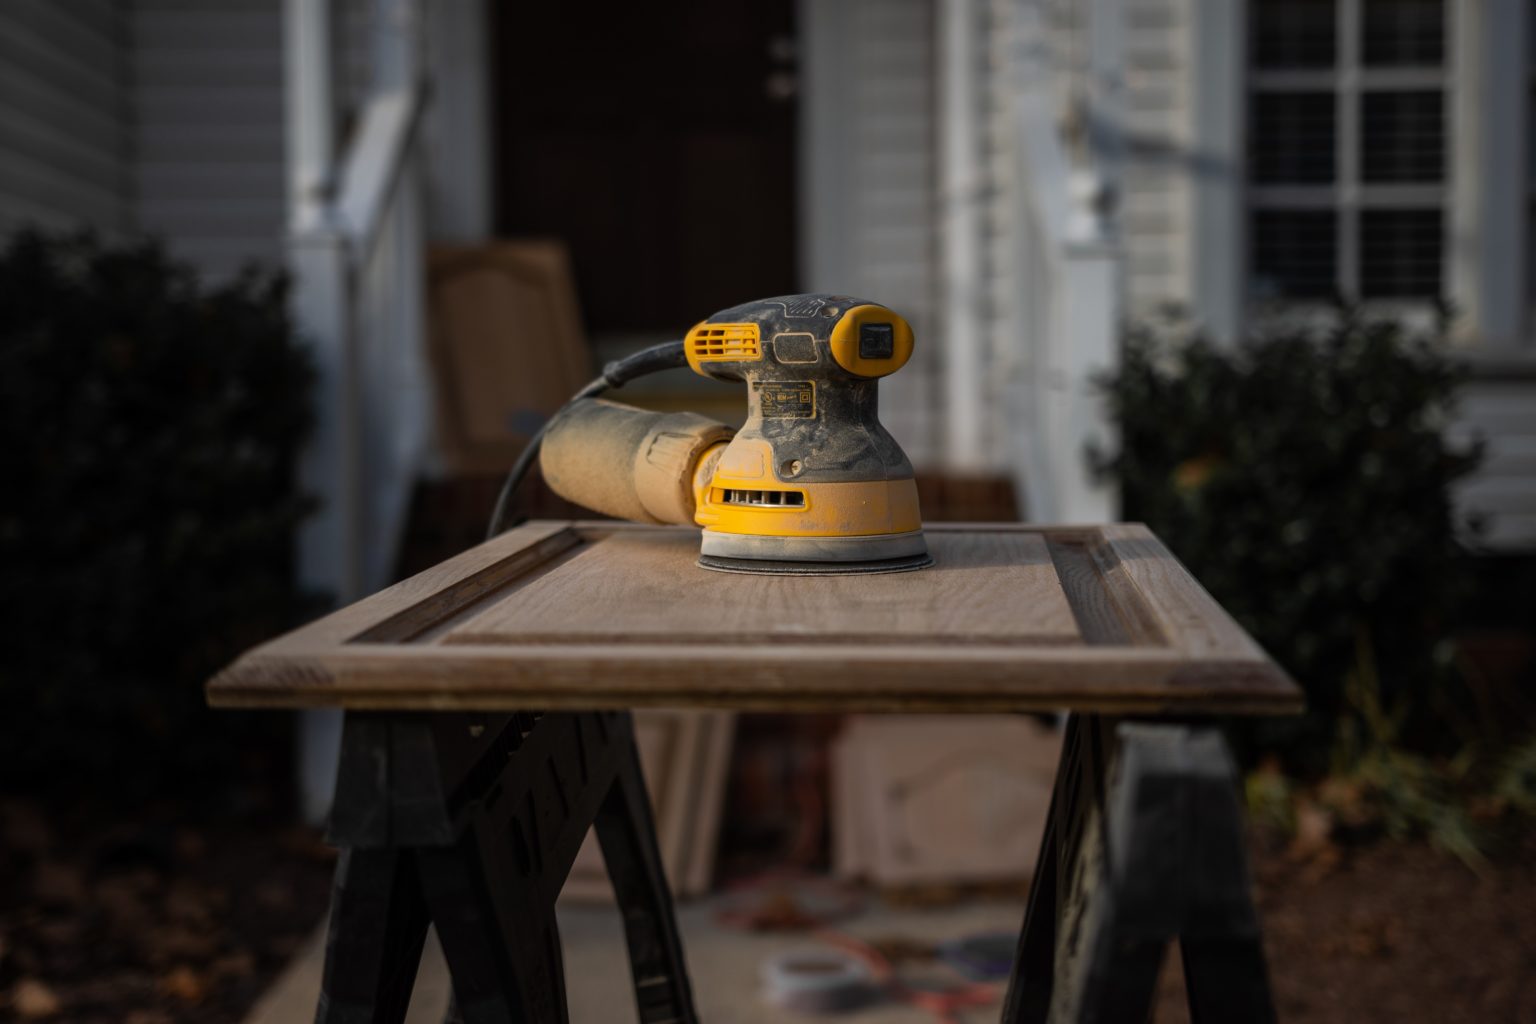 A yellow and black orbital sander ready to work on a cupboard door